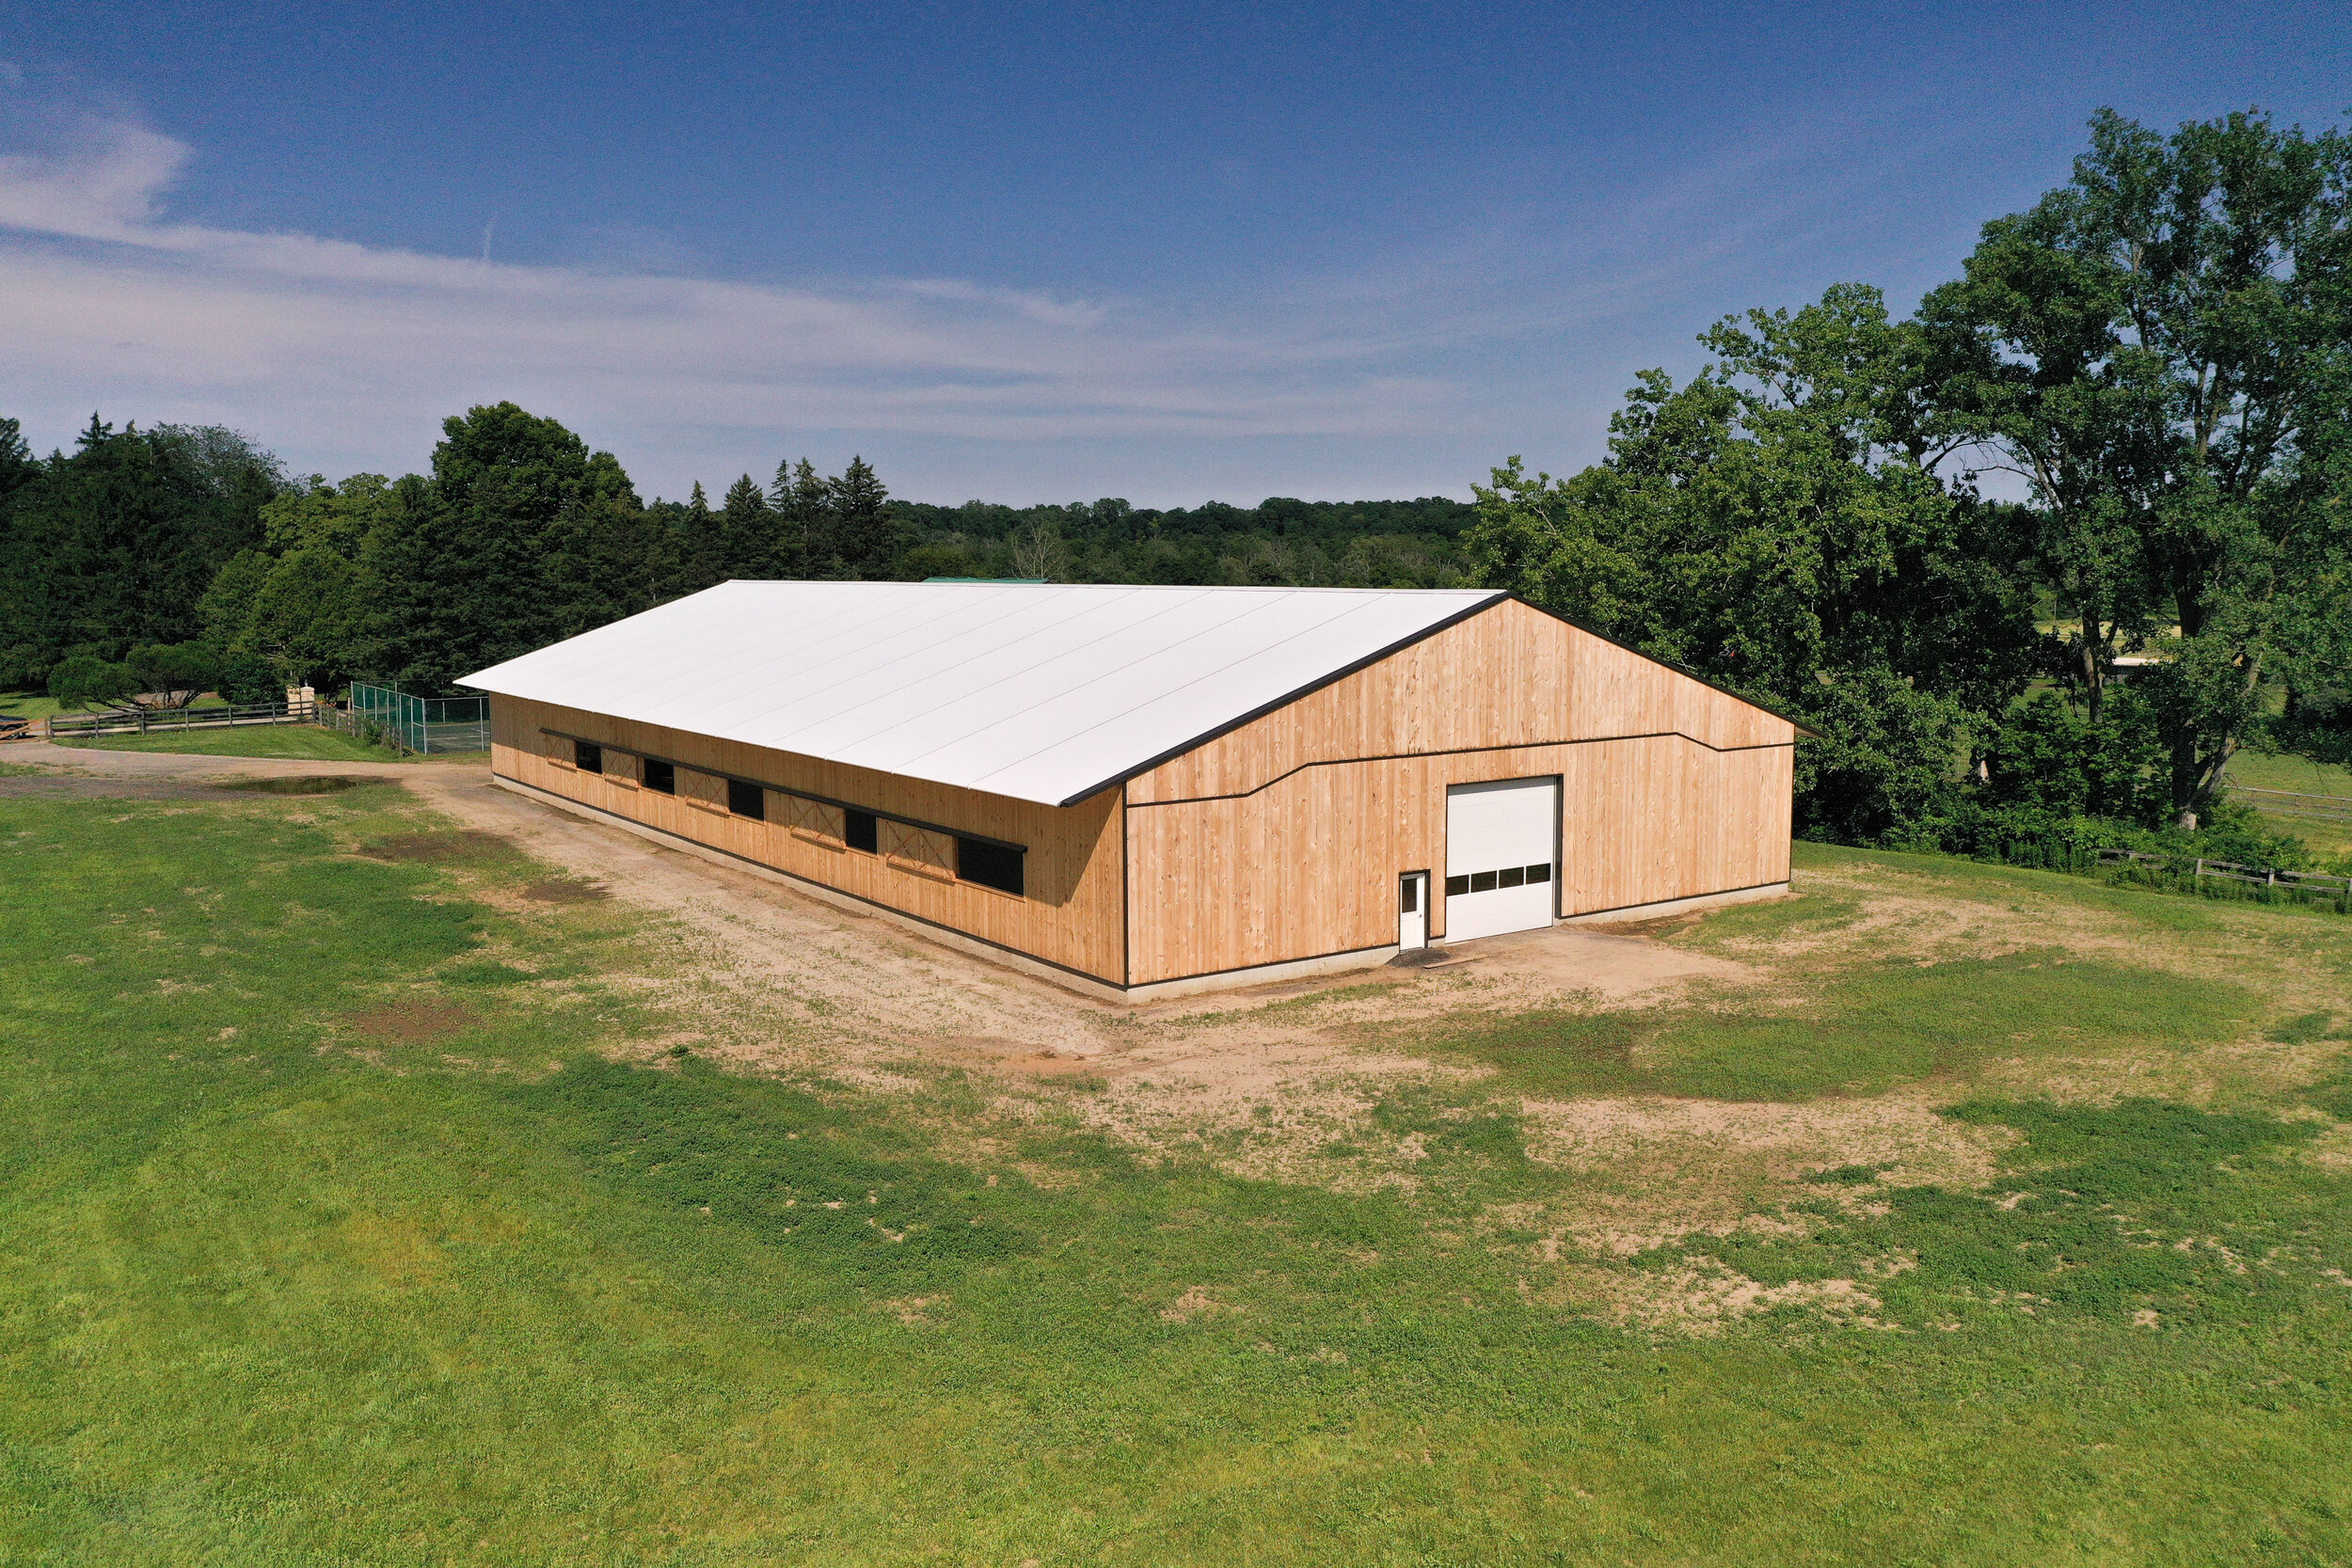 A custom 80’ x 184’ fabric roof wooden riding arena in Delaware, Ontario.